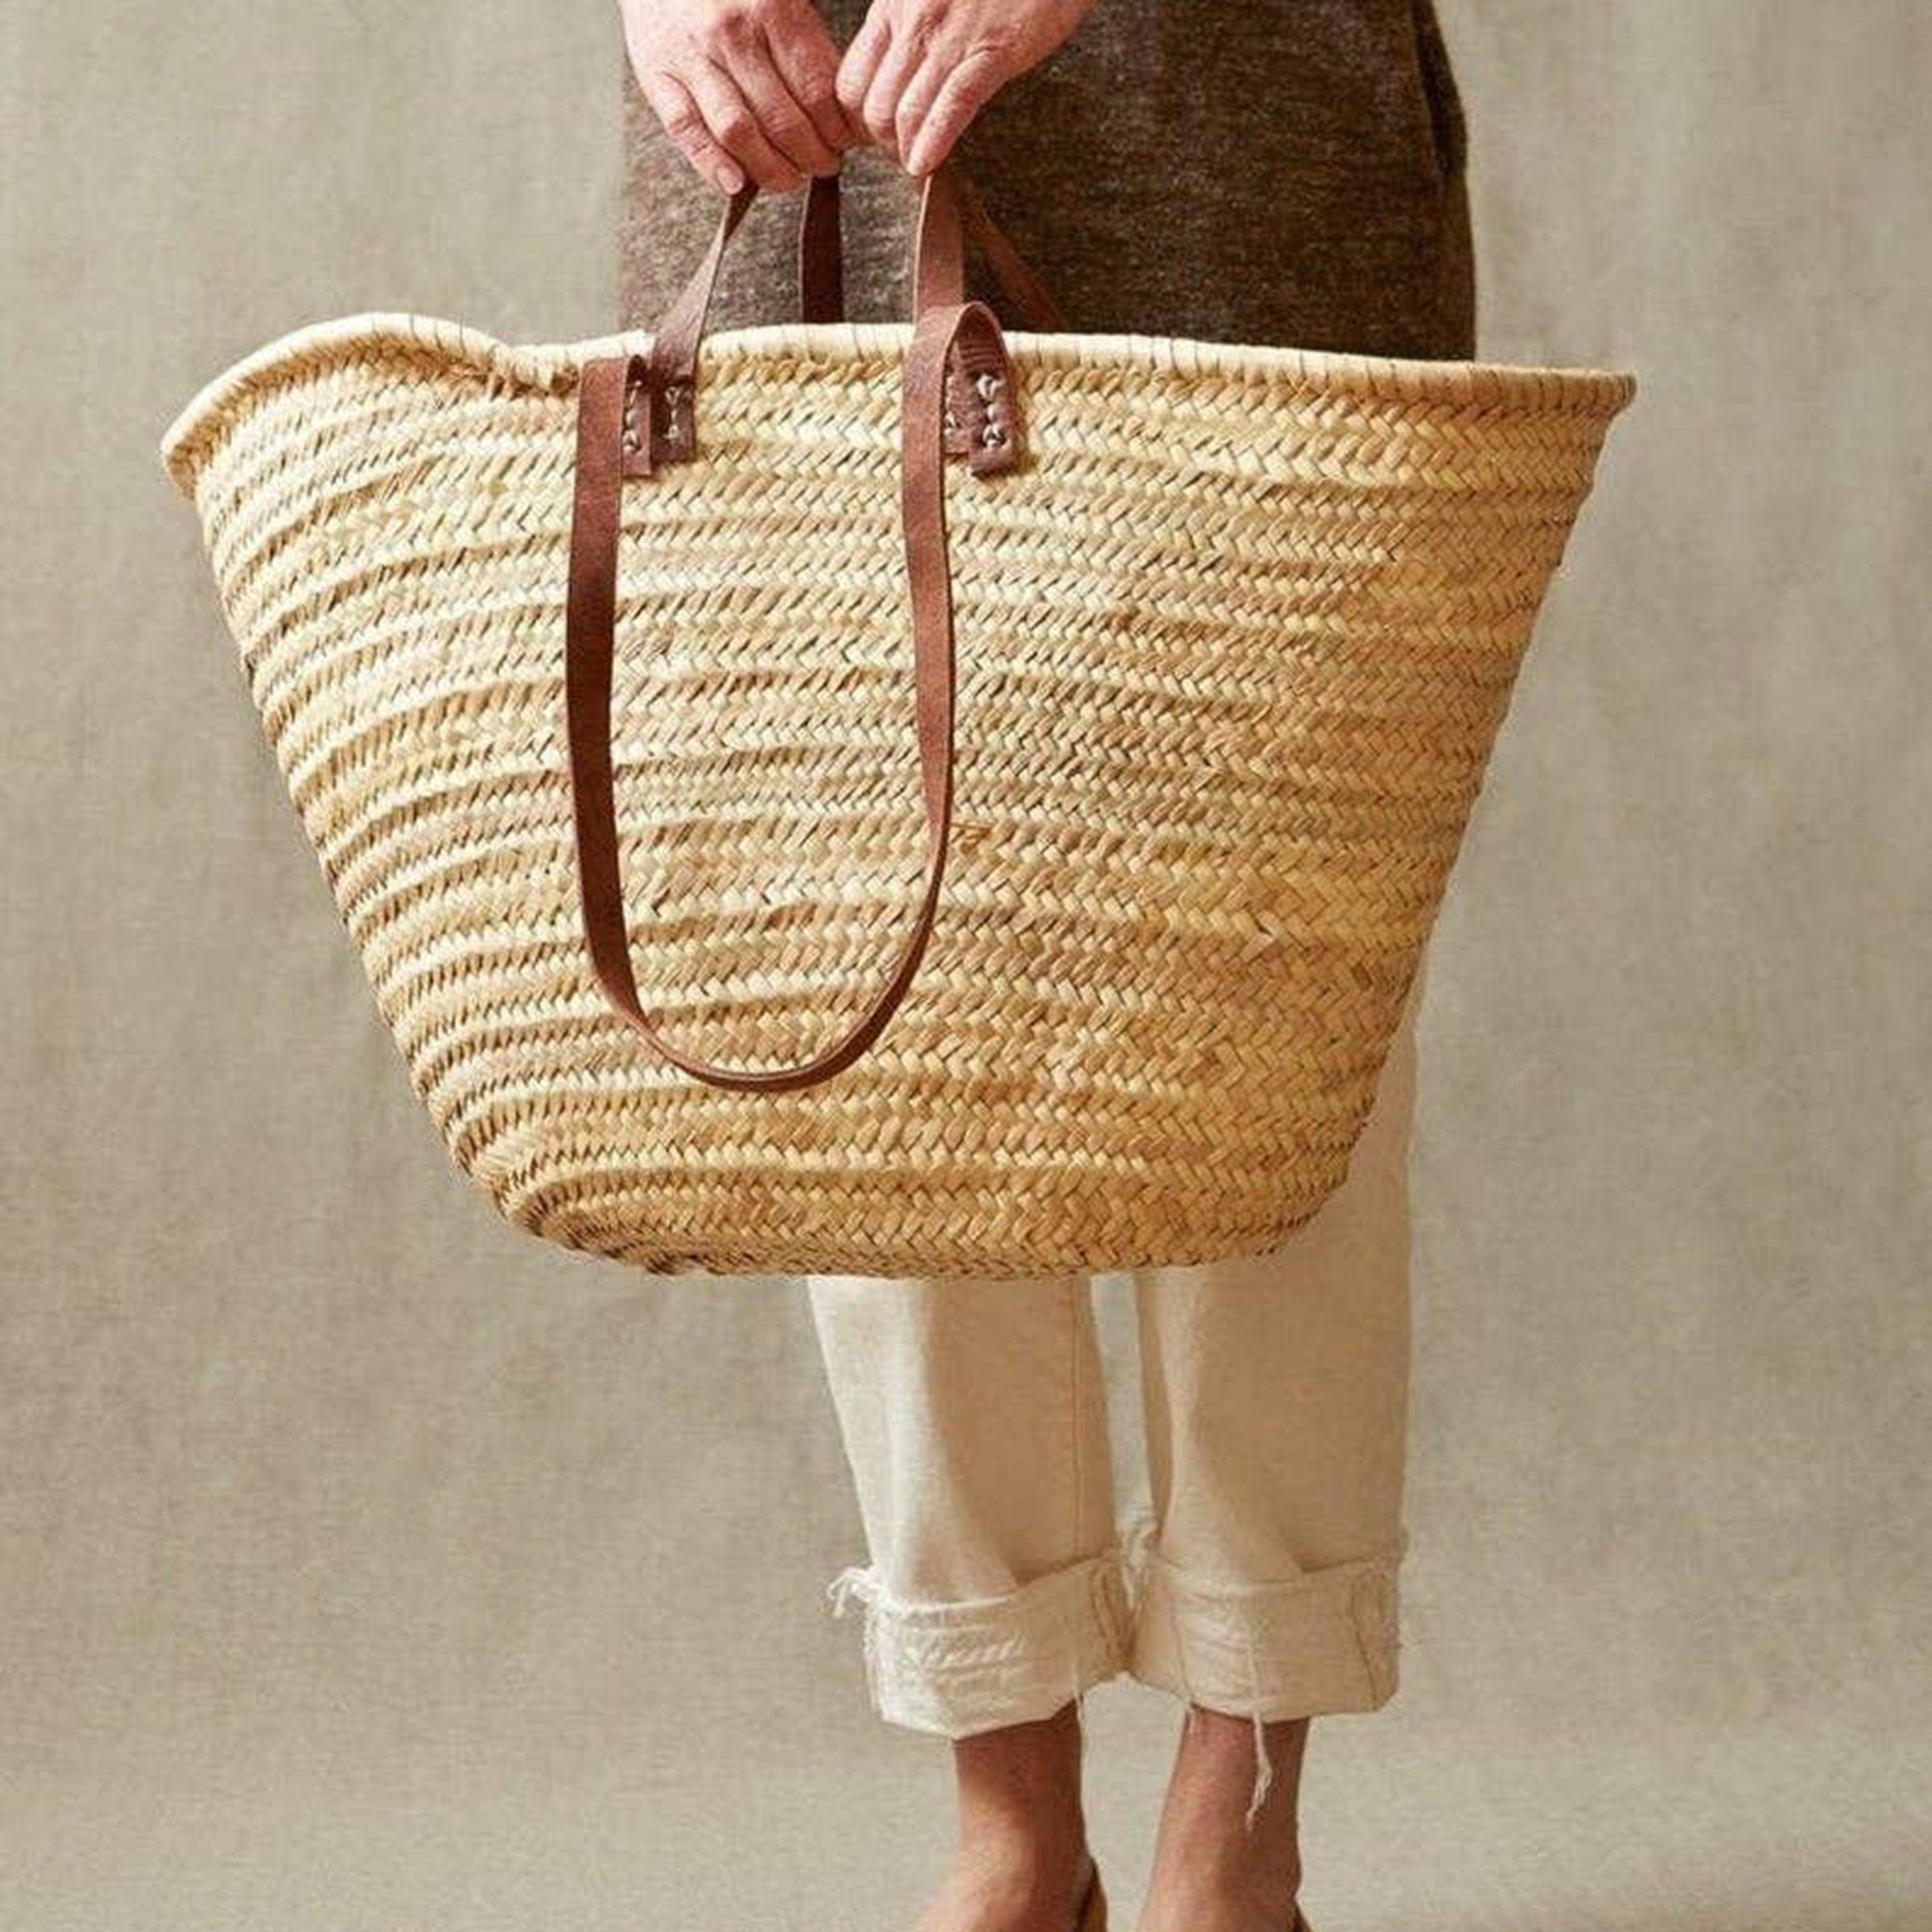 Classic French Market Basket, Double Straps